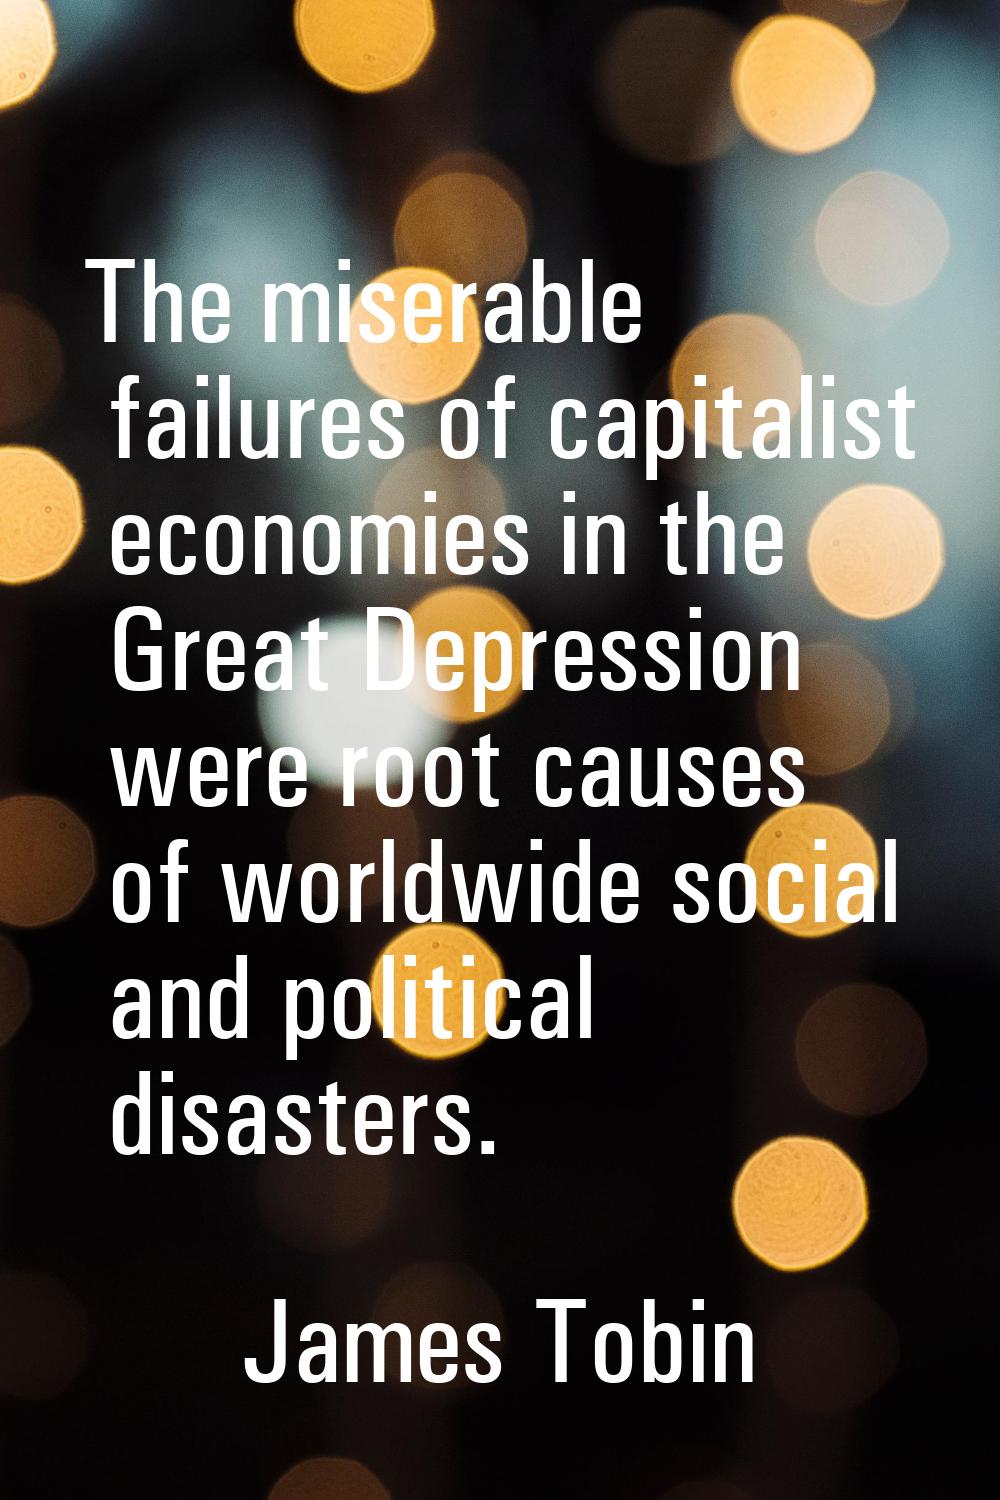 The miserable failures of capitalist economies in the Great Depression were root causes of worldwid